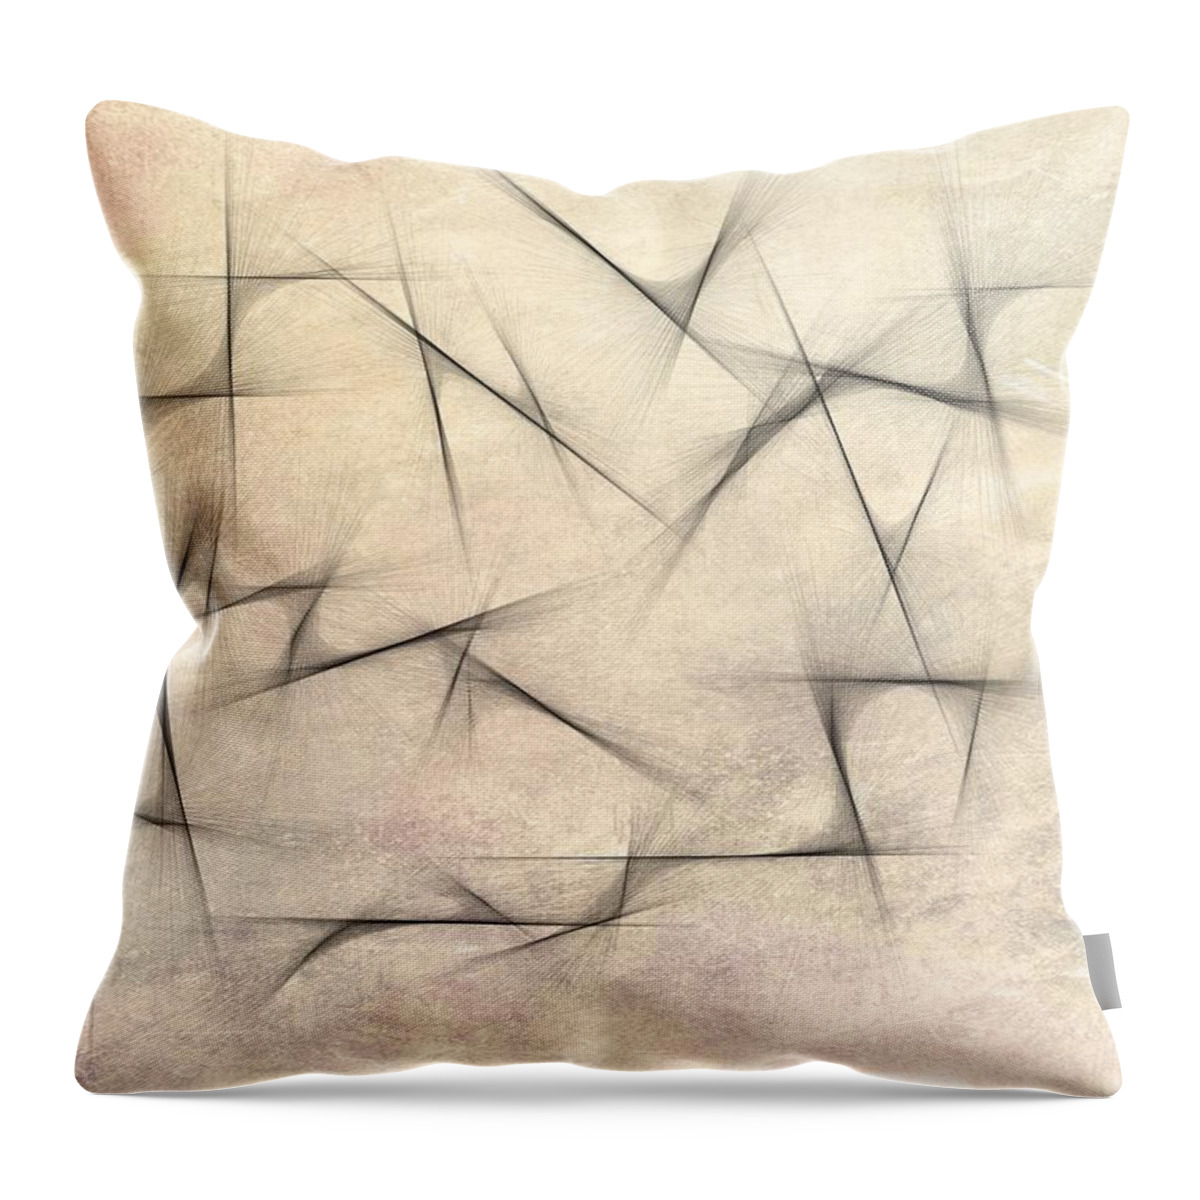 Charcoal Throw Pillow featuring the painting Abstract 1999 by Marian Lonzetta